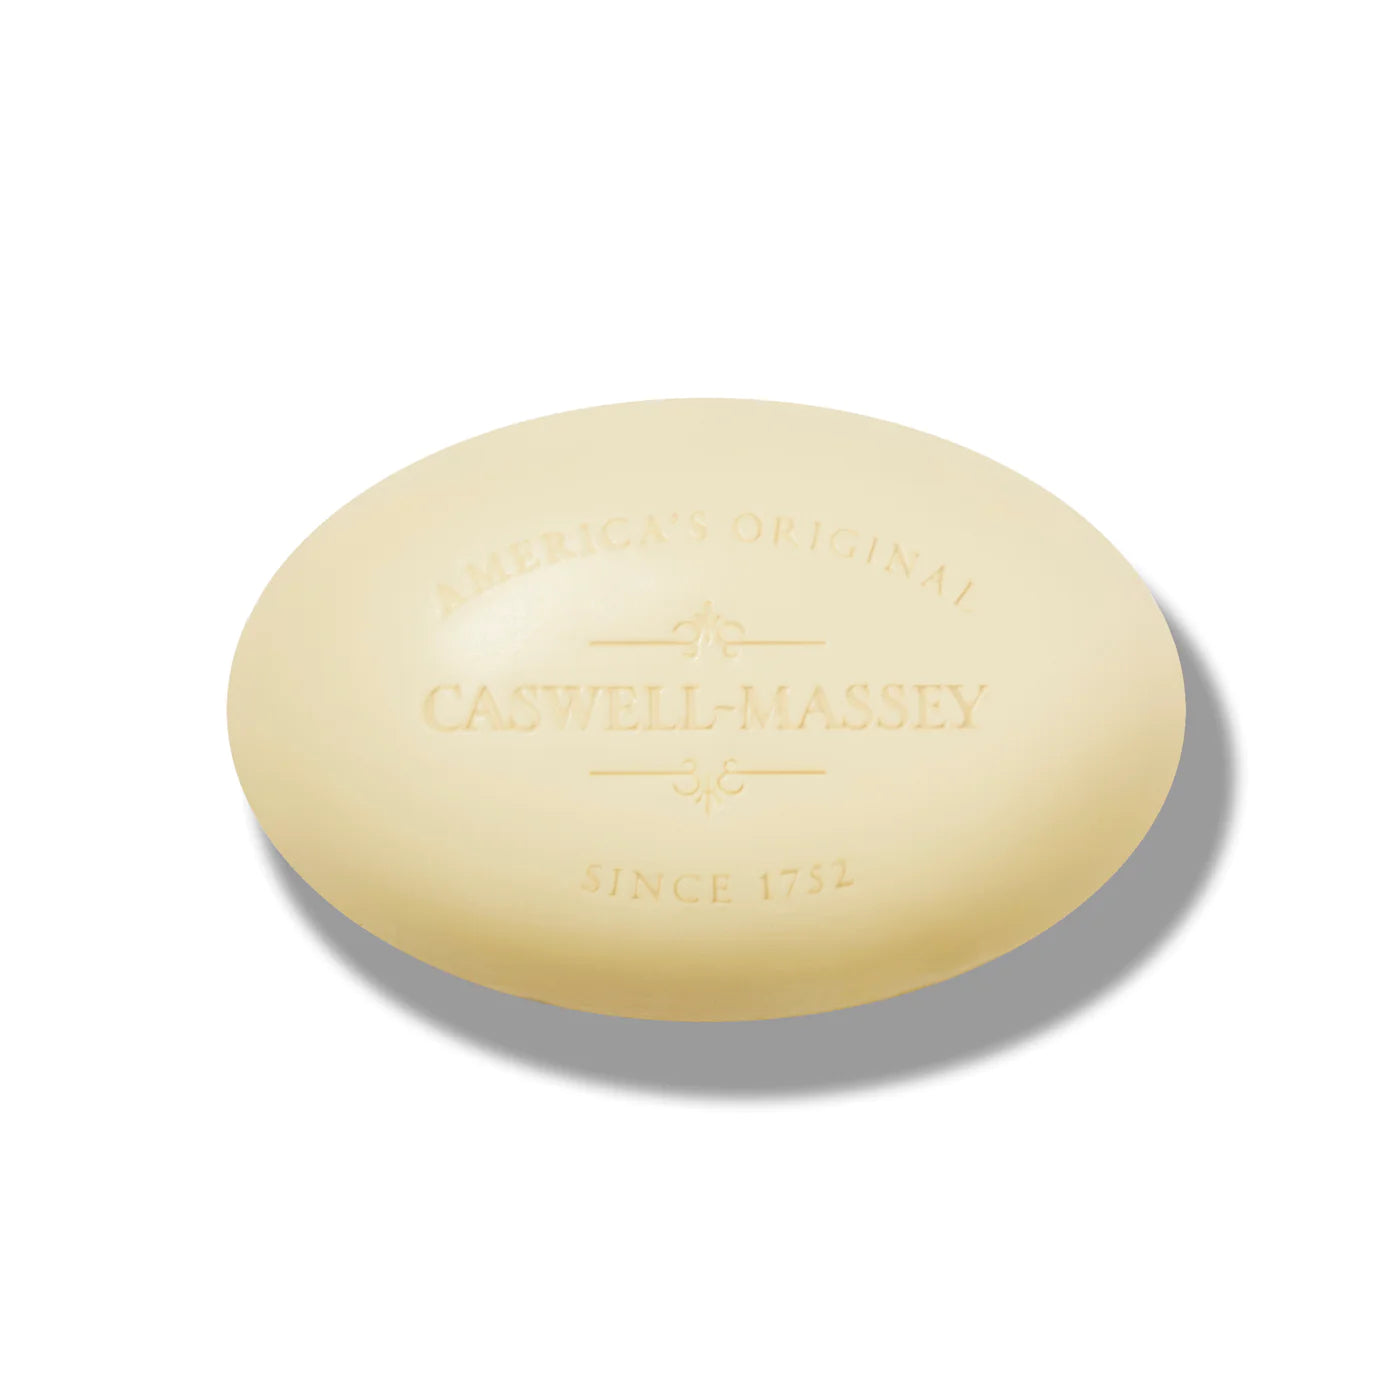 Caswell-Massey Number Six Soap